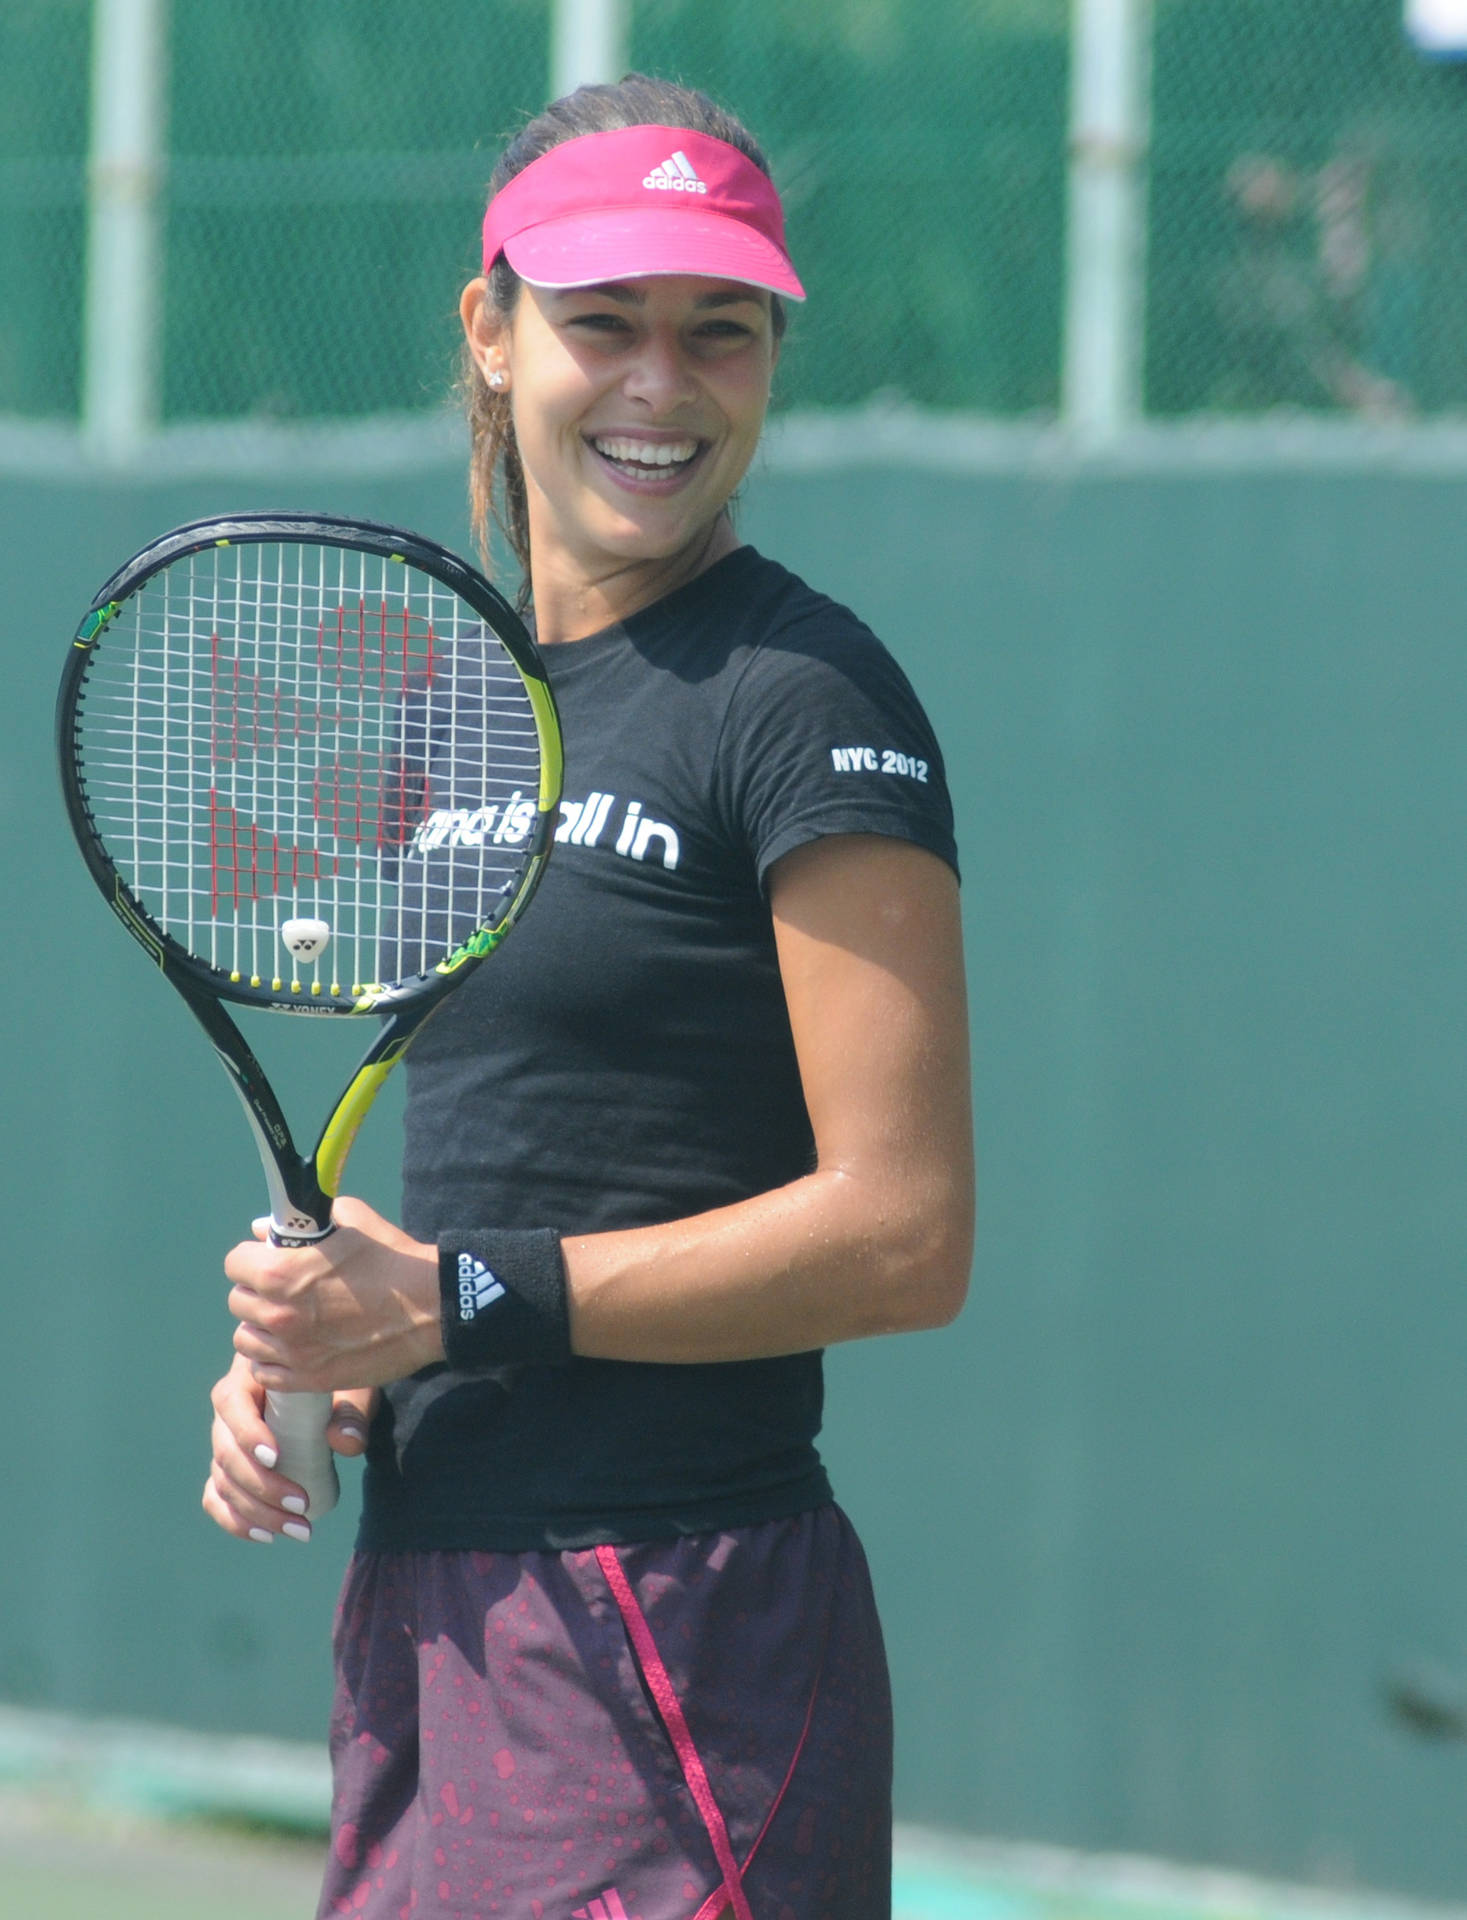 Ana Ivanovic Smiling In The Crowd Wallpaper